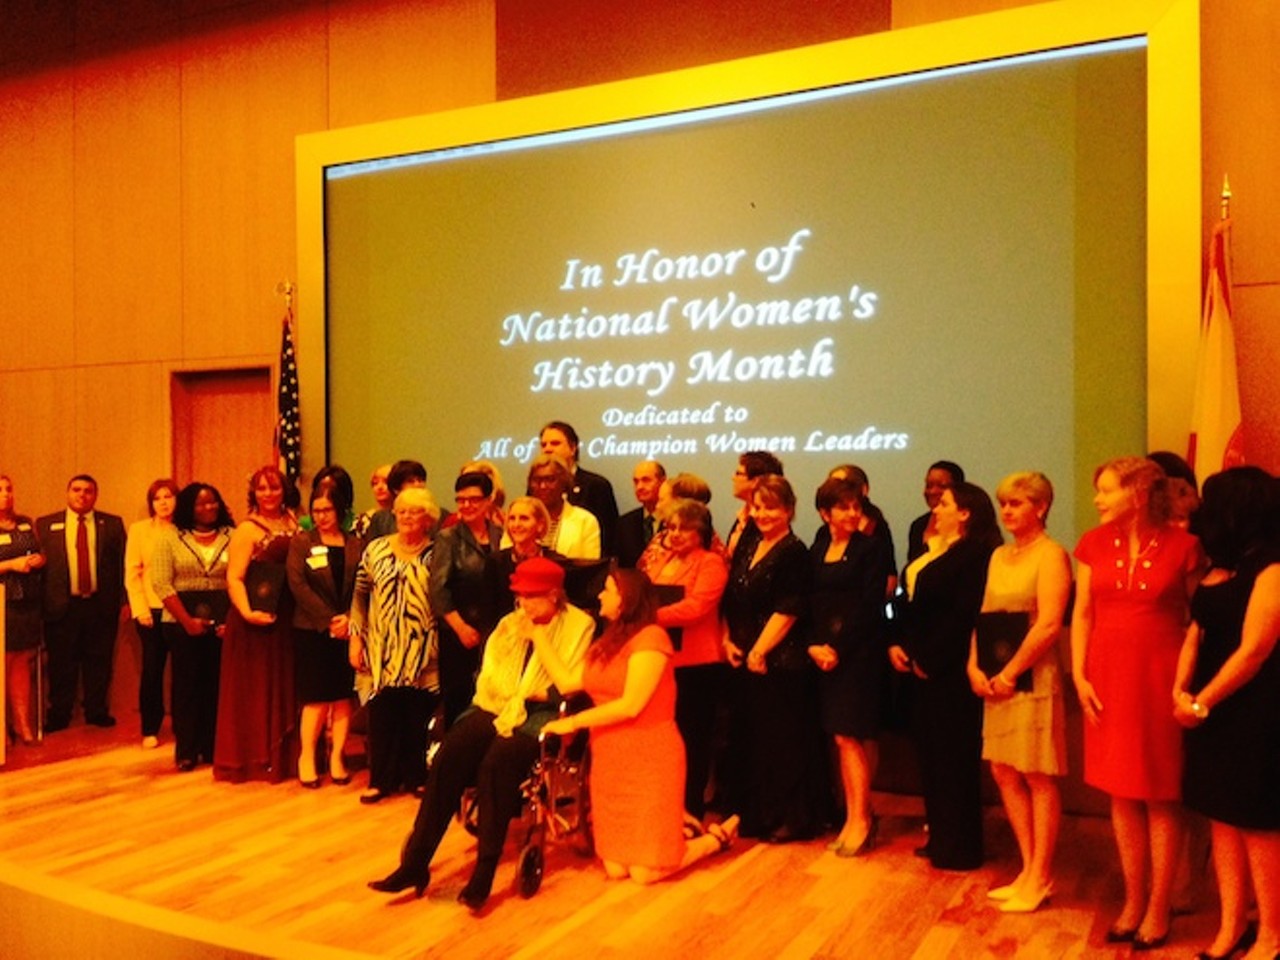 Congressman Alan Grayson honored 50 local women leaders at a Women's History Month celebration on Friday.